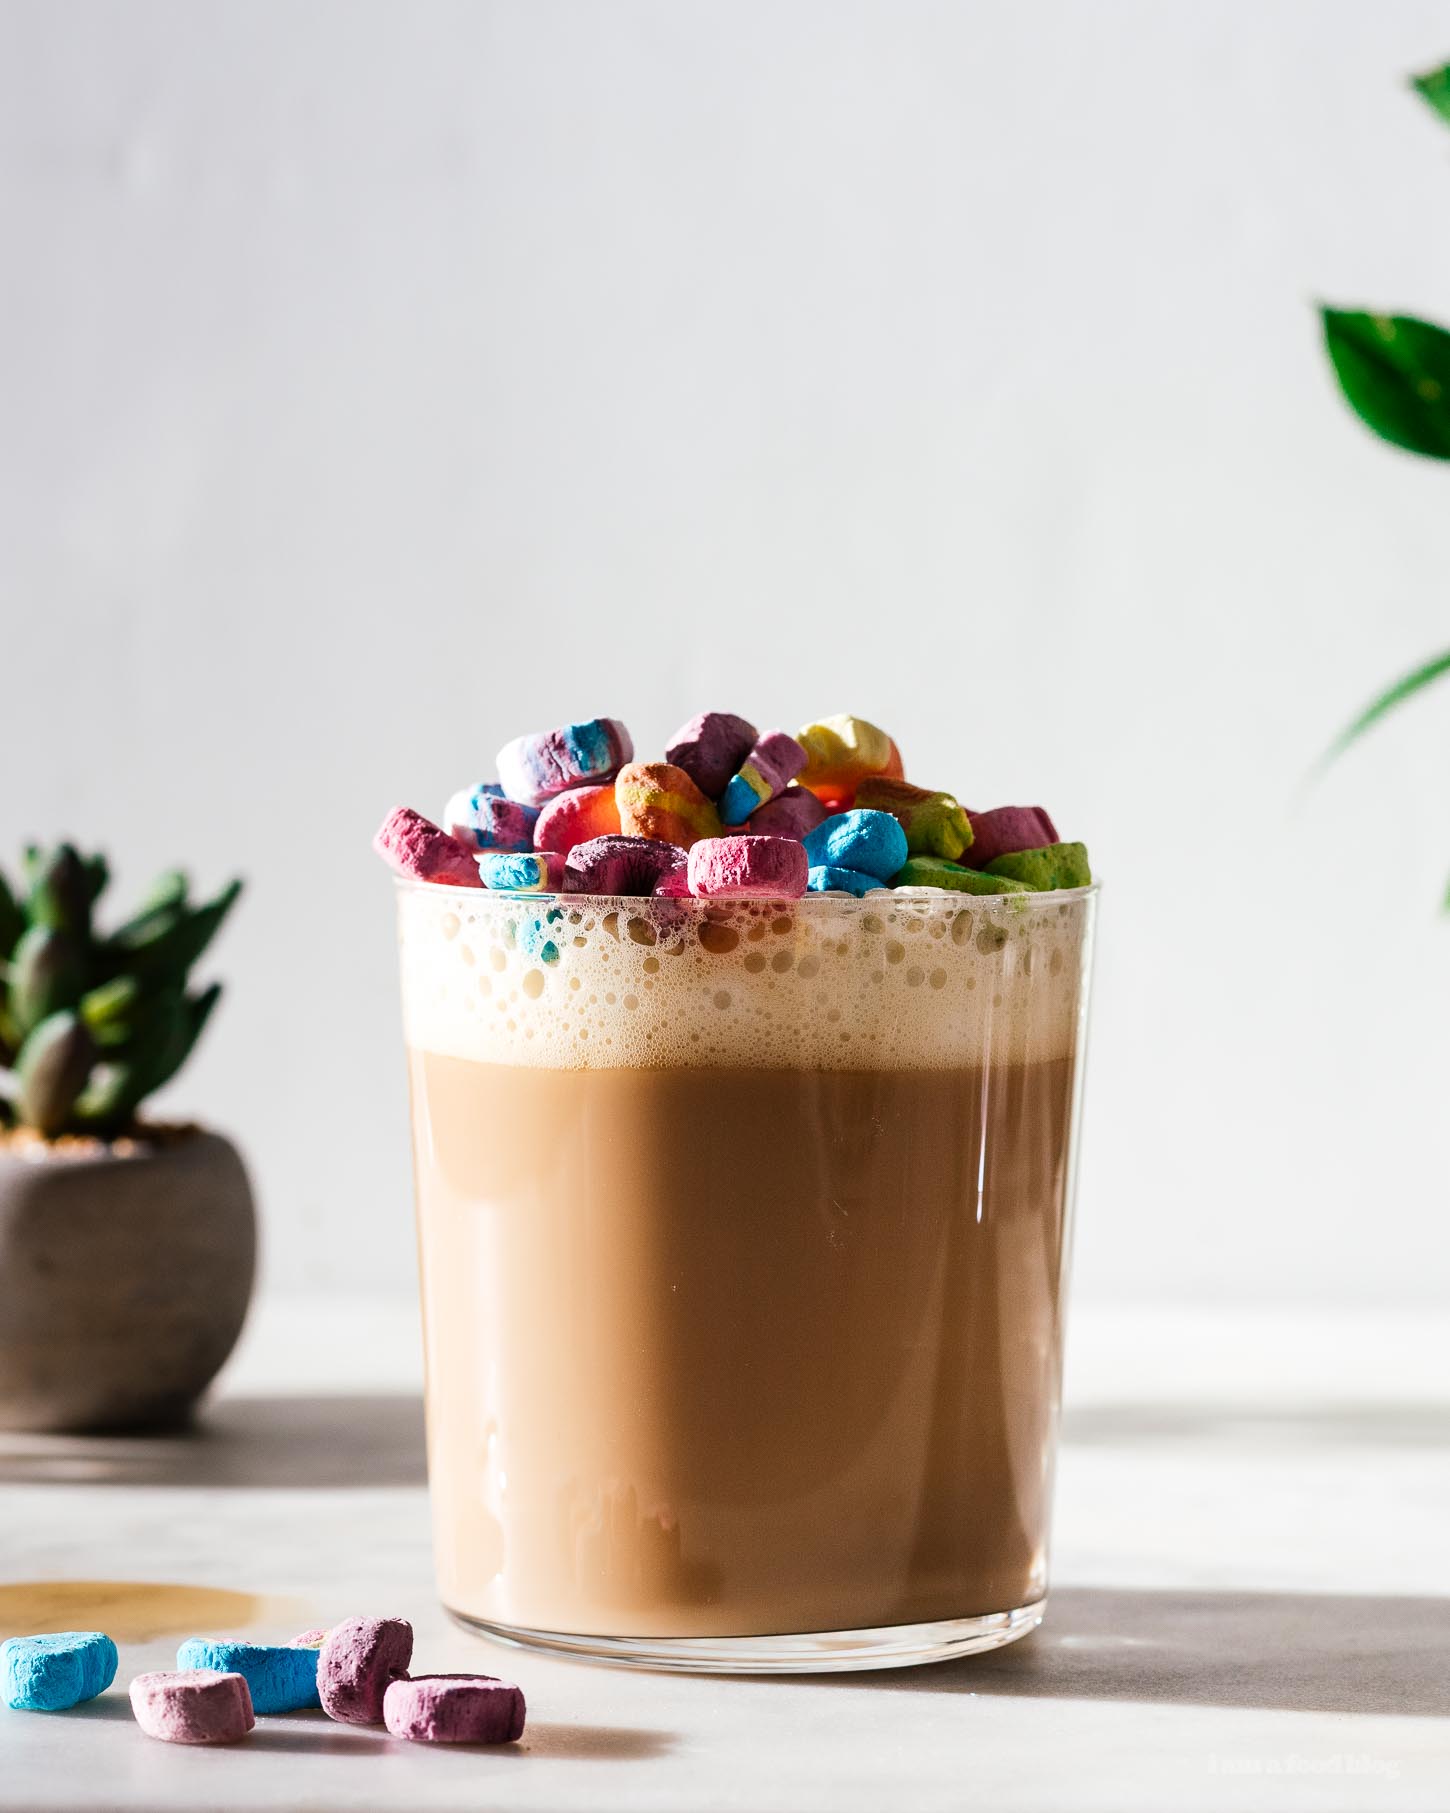 How to Make a Lucky Charms Cereal Milk Latte | www.iamafoodblog.com